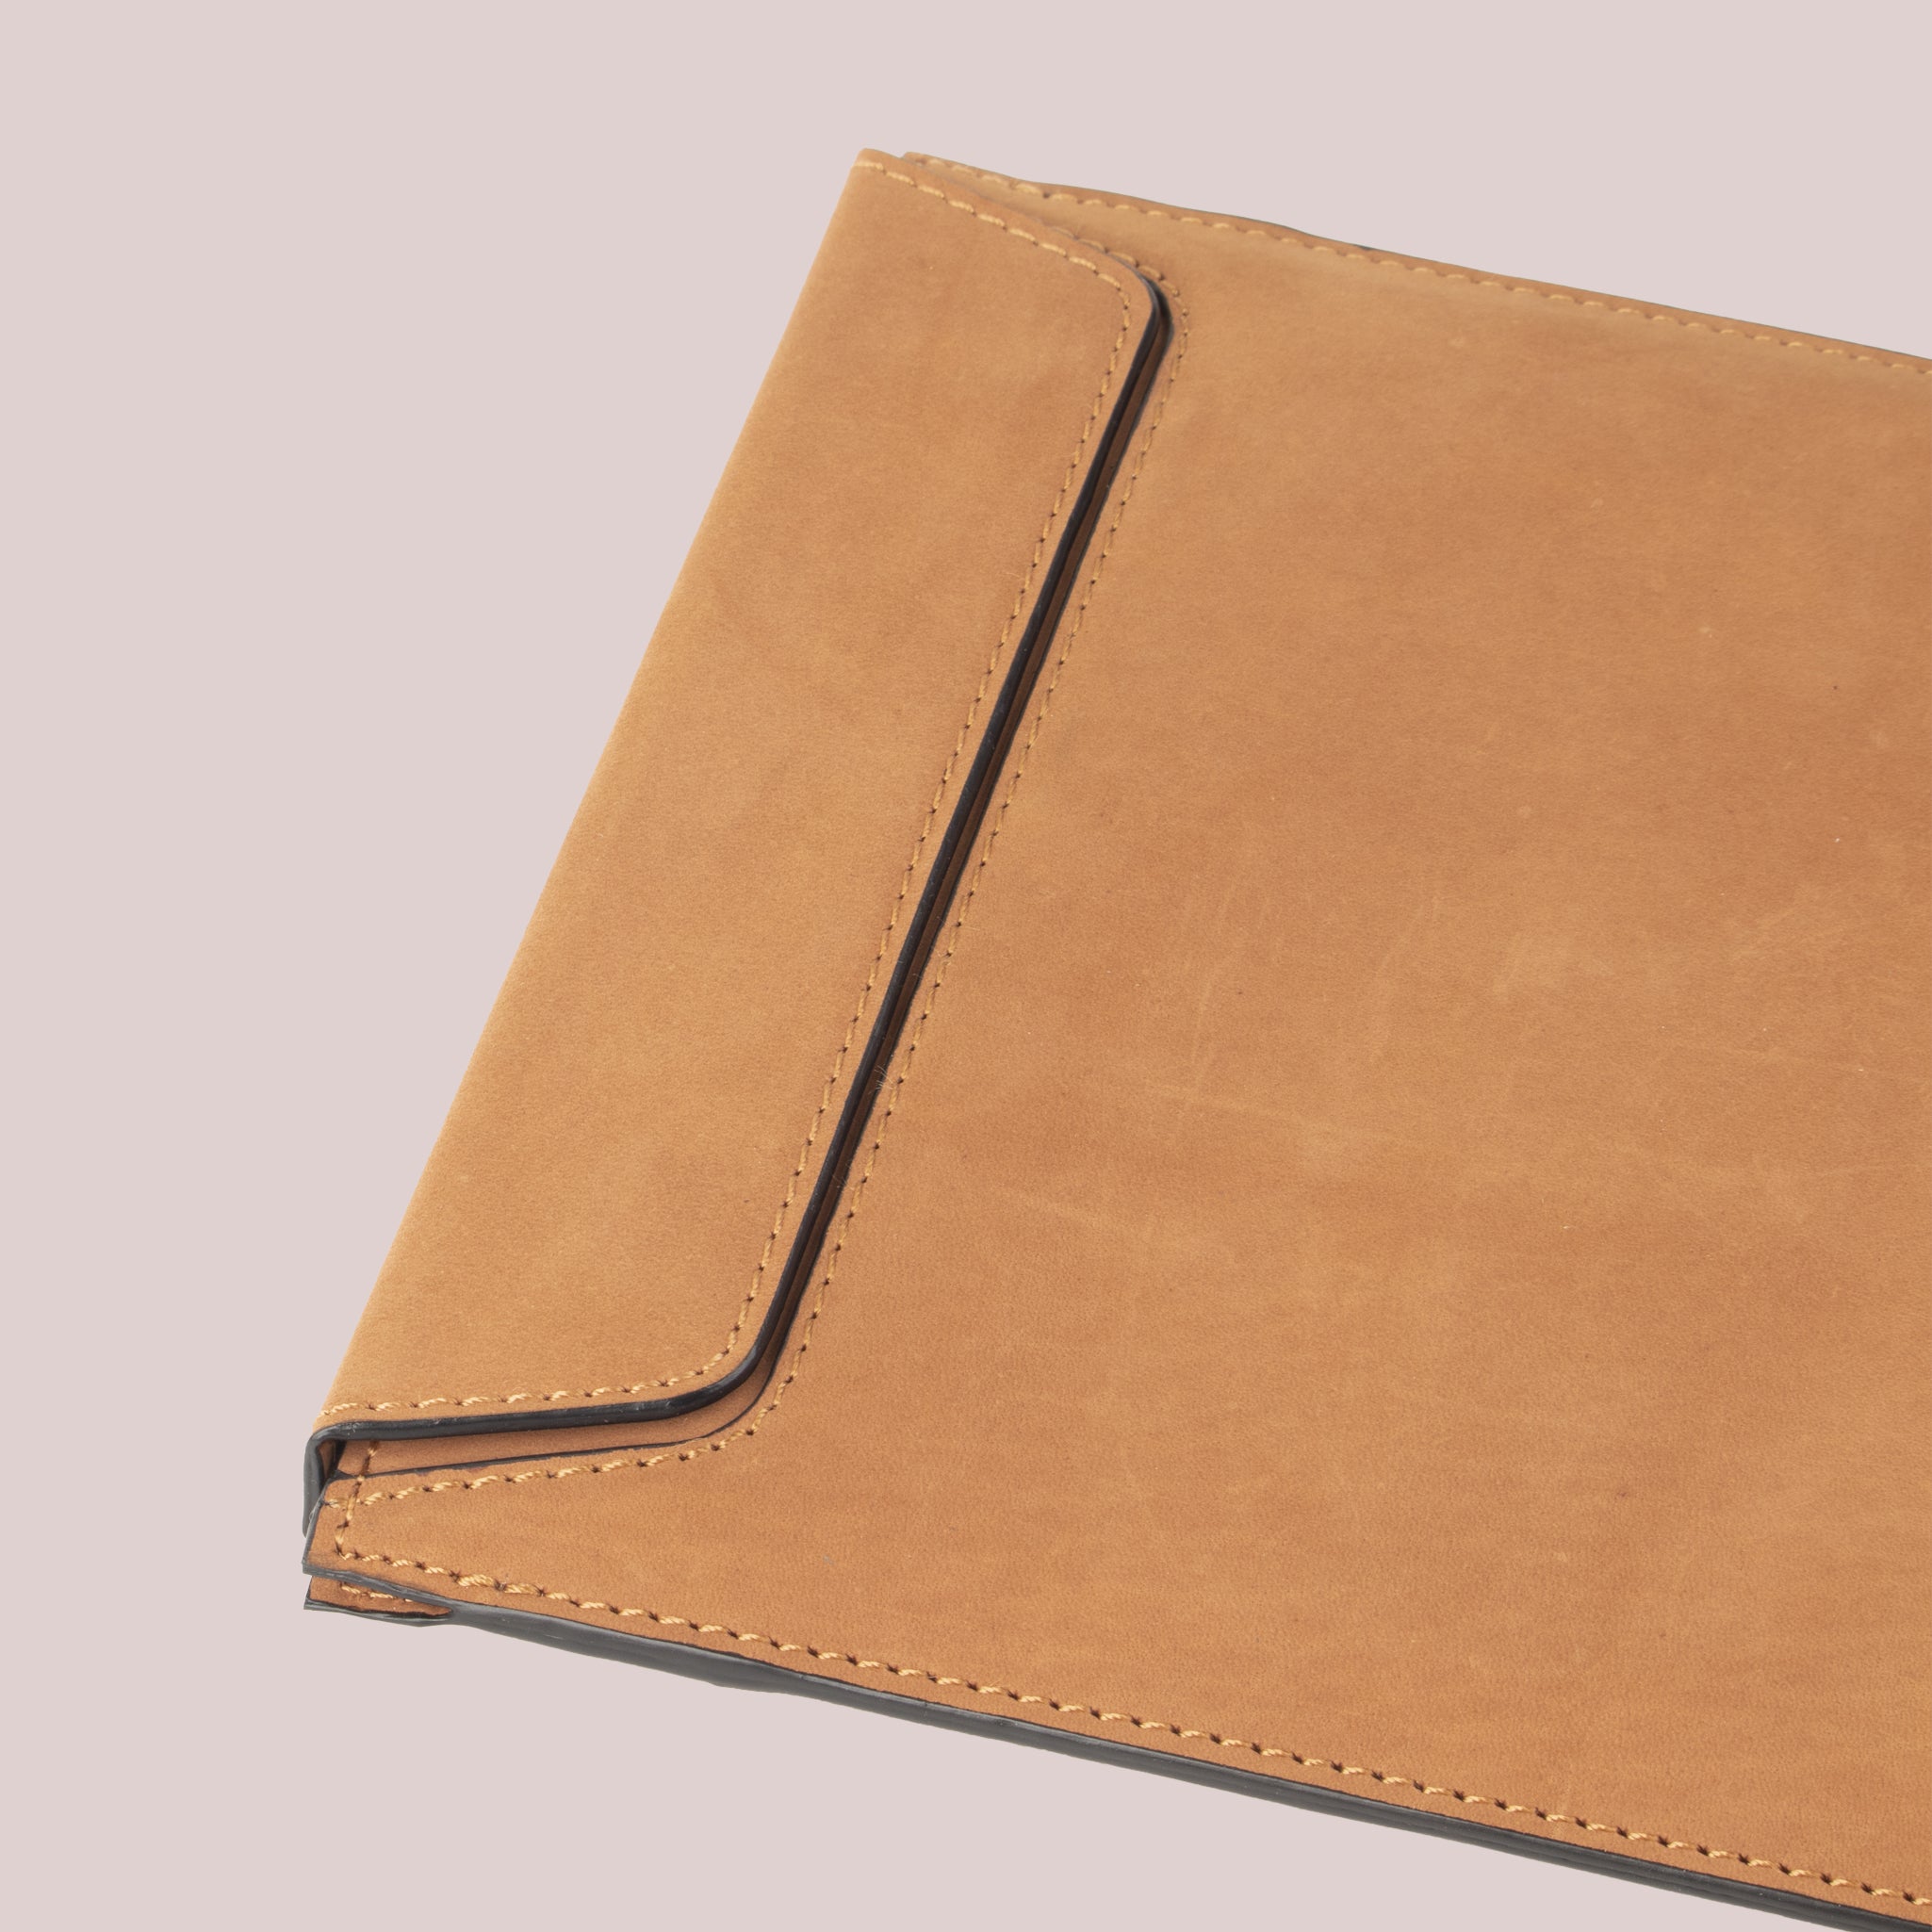 Buy Tan leather sleeve with a flap for Macbook laptops